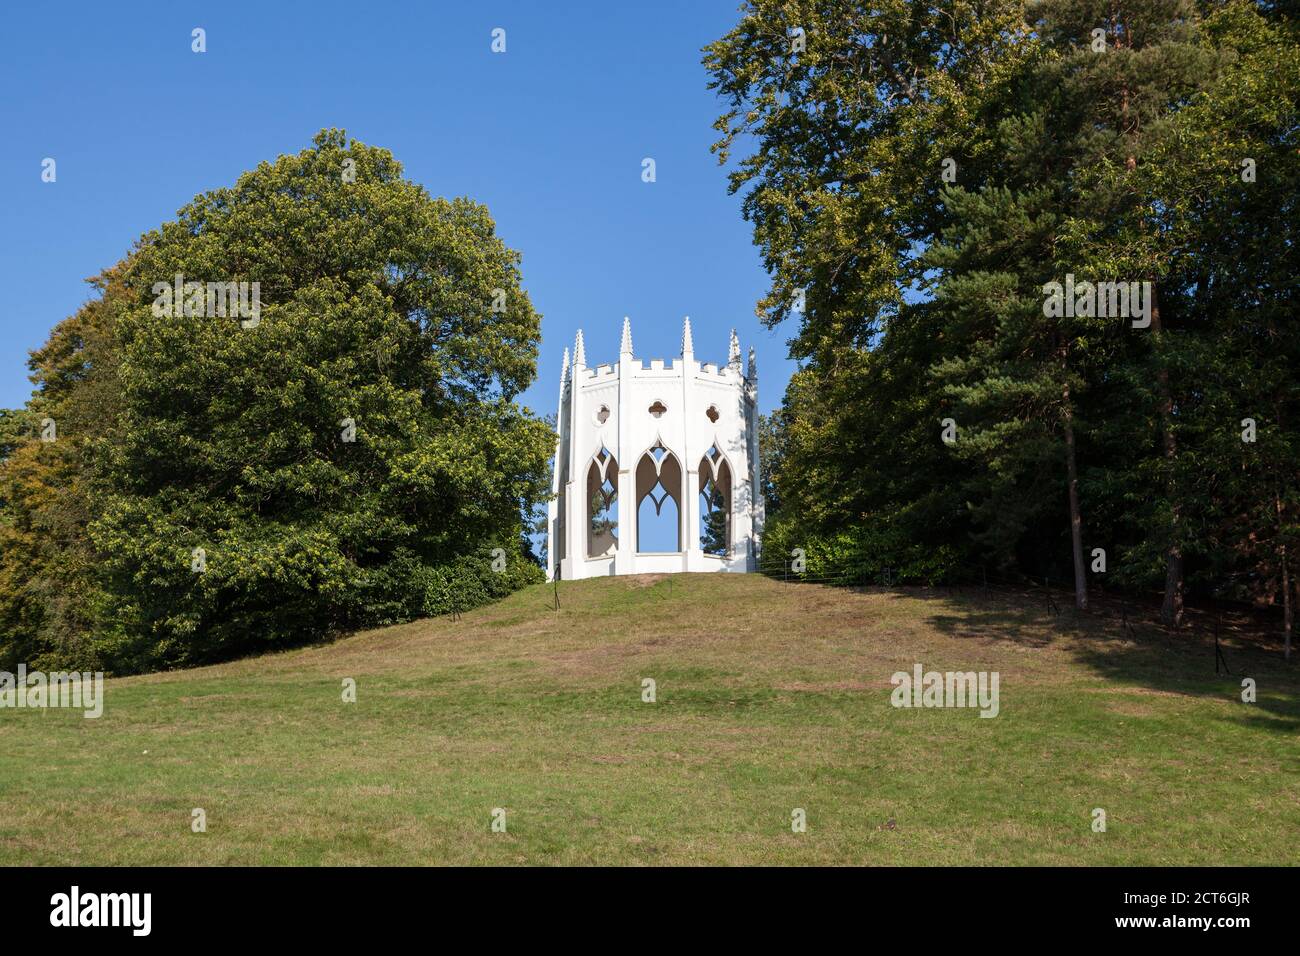 Gothic Temple at Painshill Park in Surrey, UK. Stock Photo